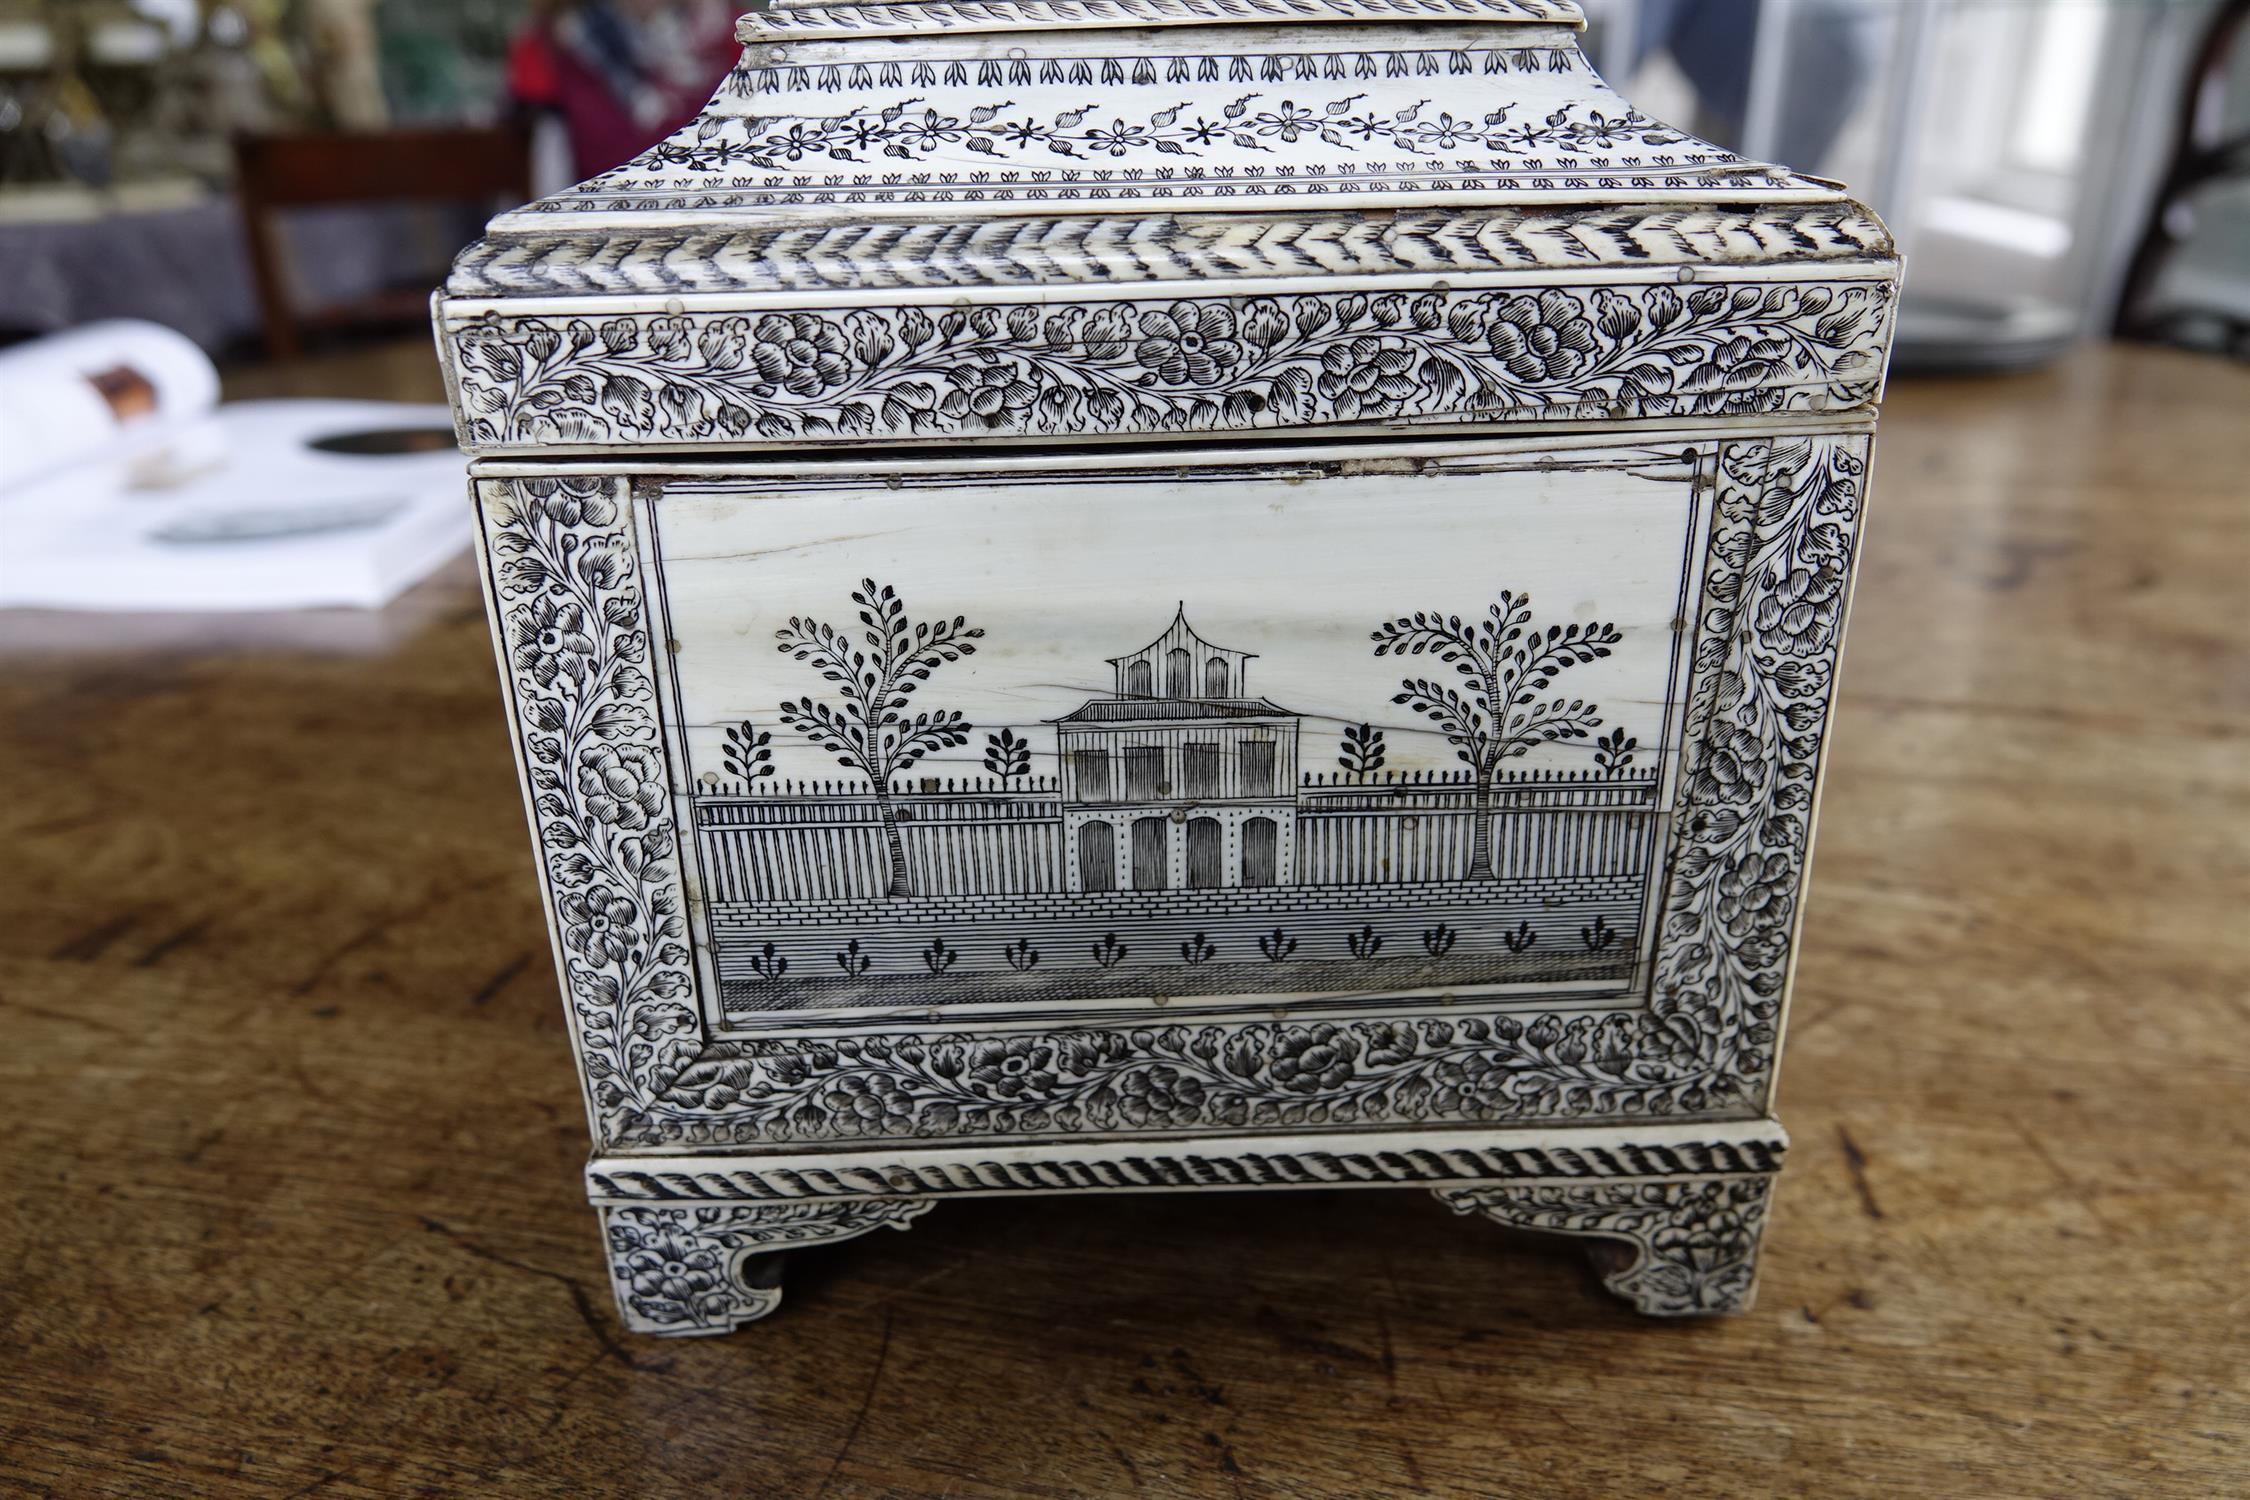 AN ANGLO-INDIAN VIZAGAPATAM TEA CASKET, c.1800, engraved overall in black ink with foliate borders - Image 8 of 22